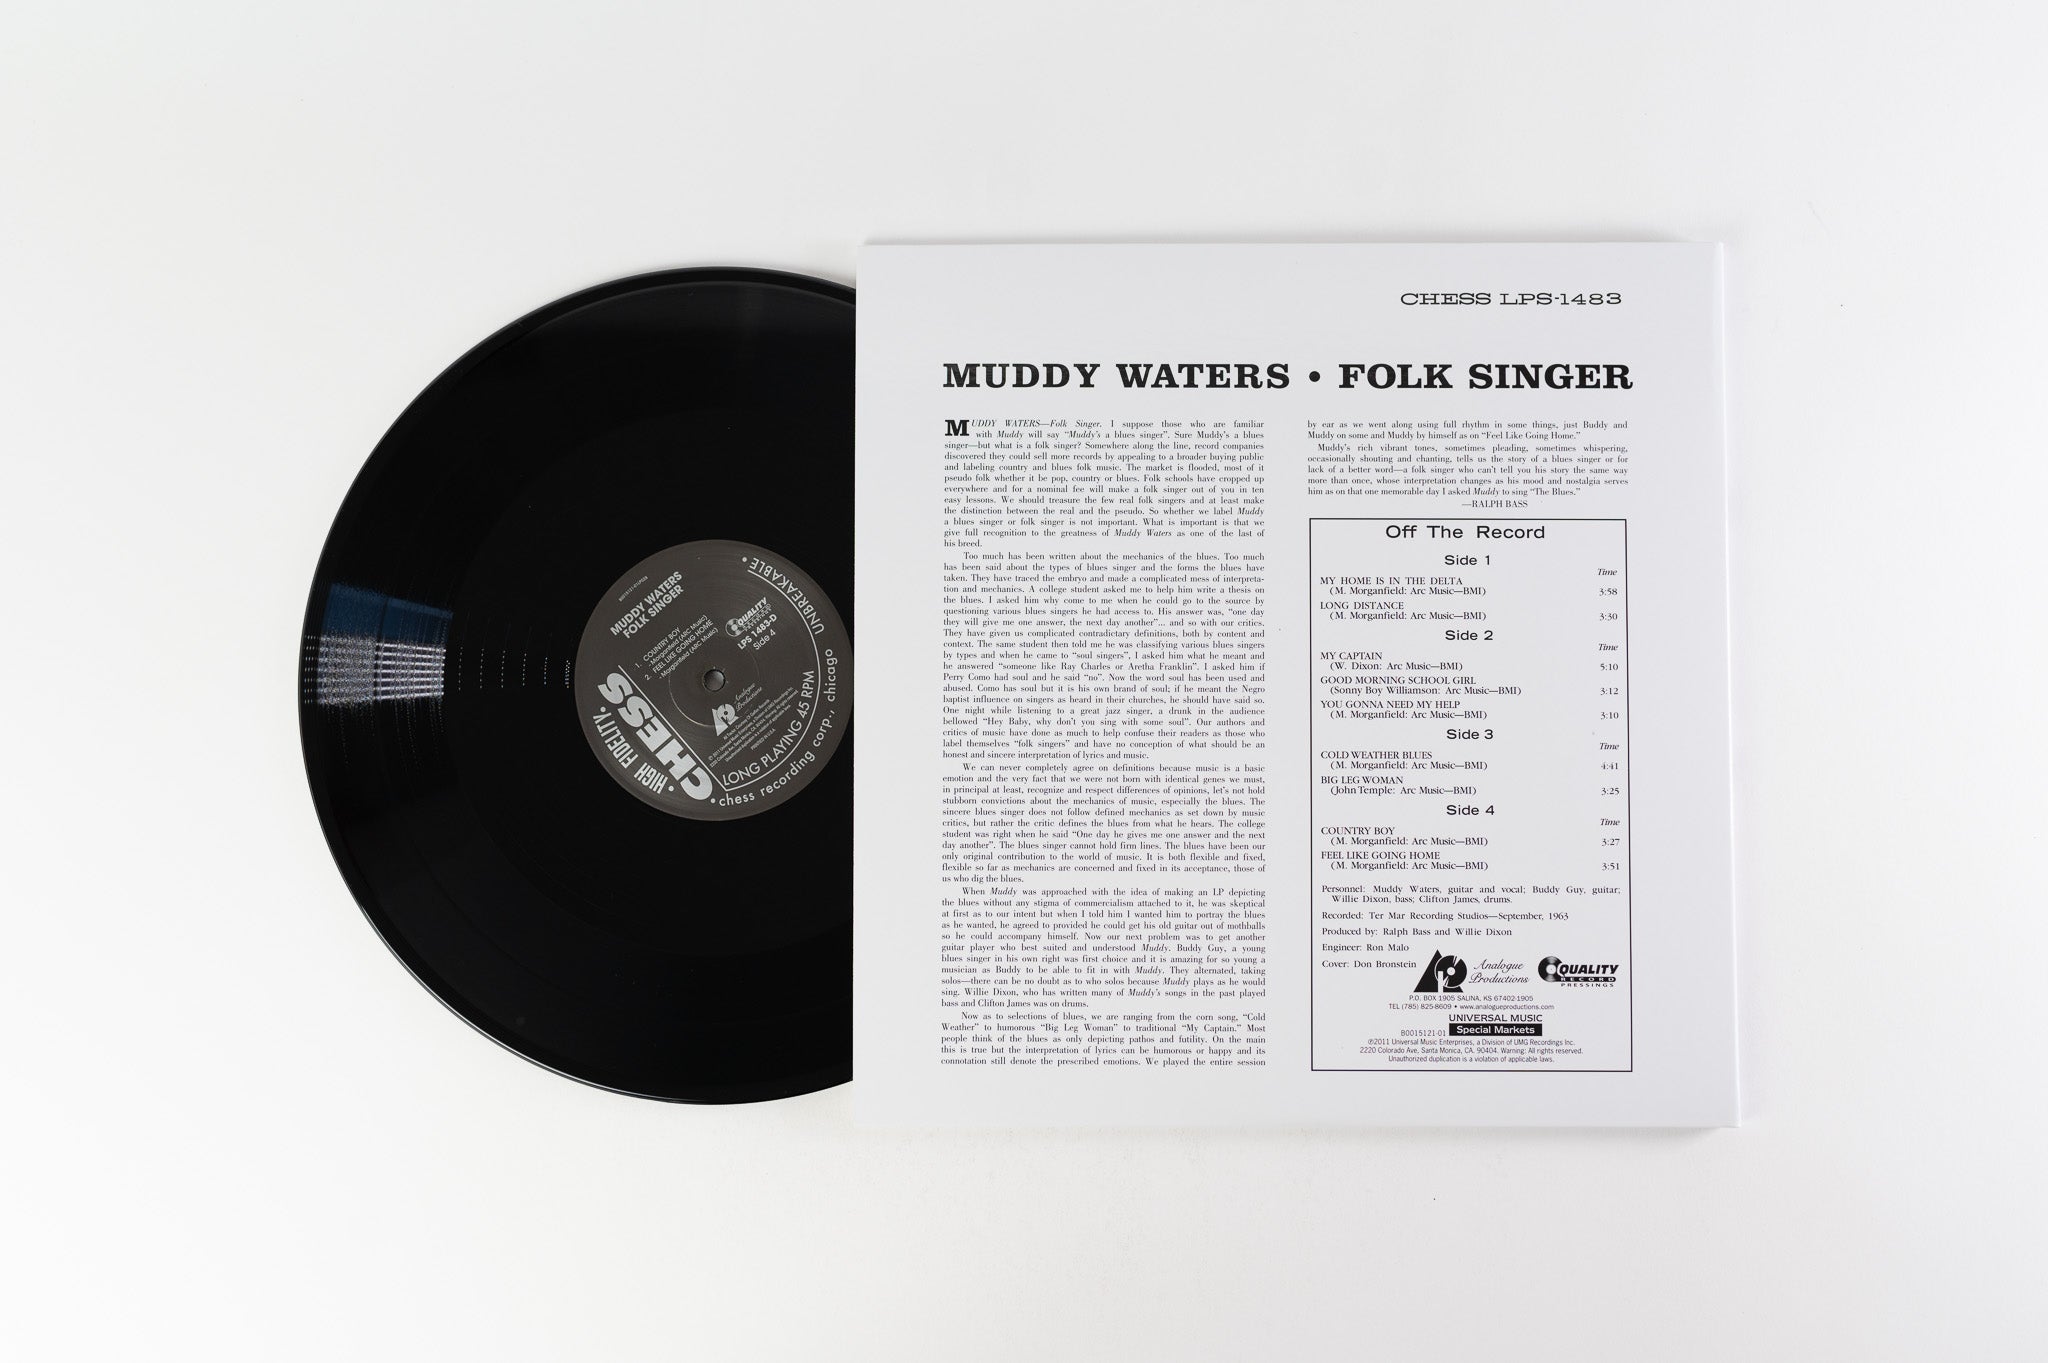 Muddy Waters - Folk Singer Reissue 45 RPM on Analogue Productions